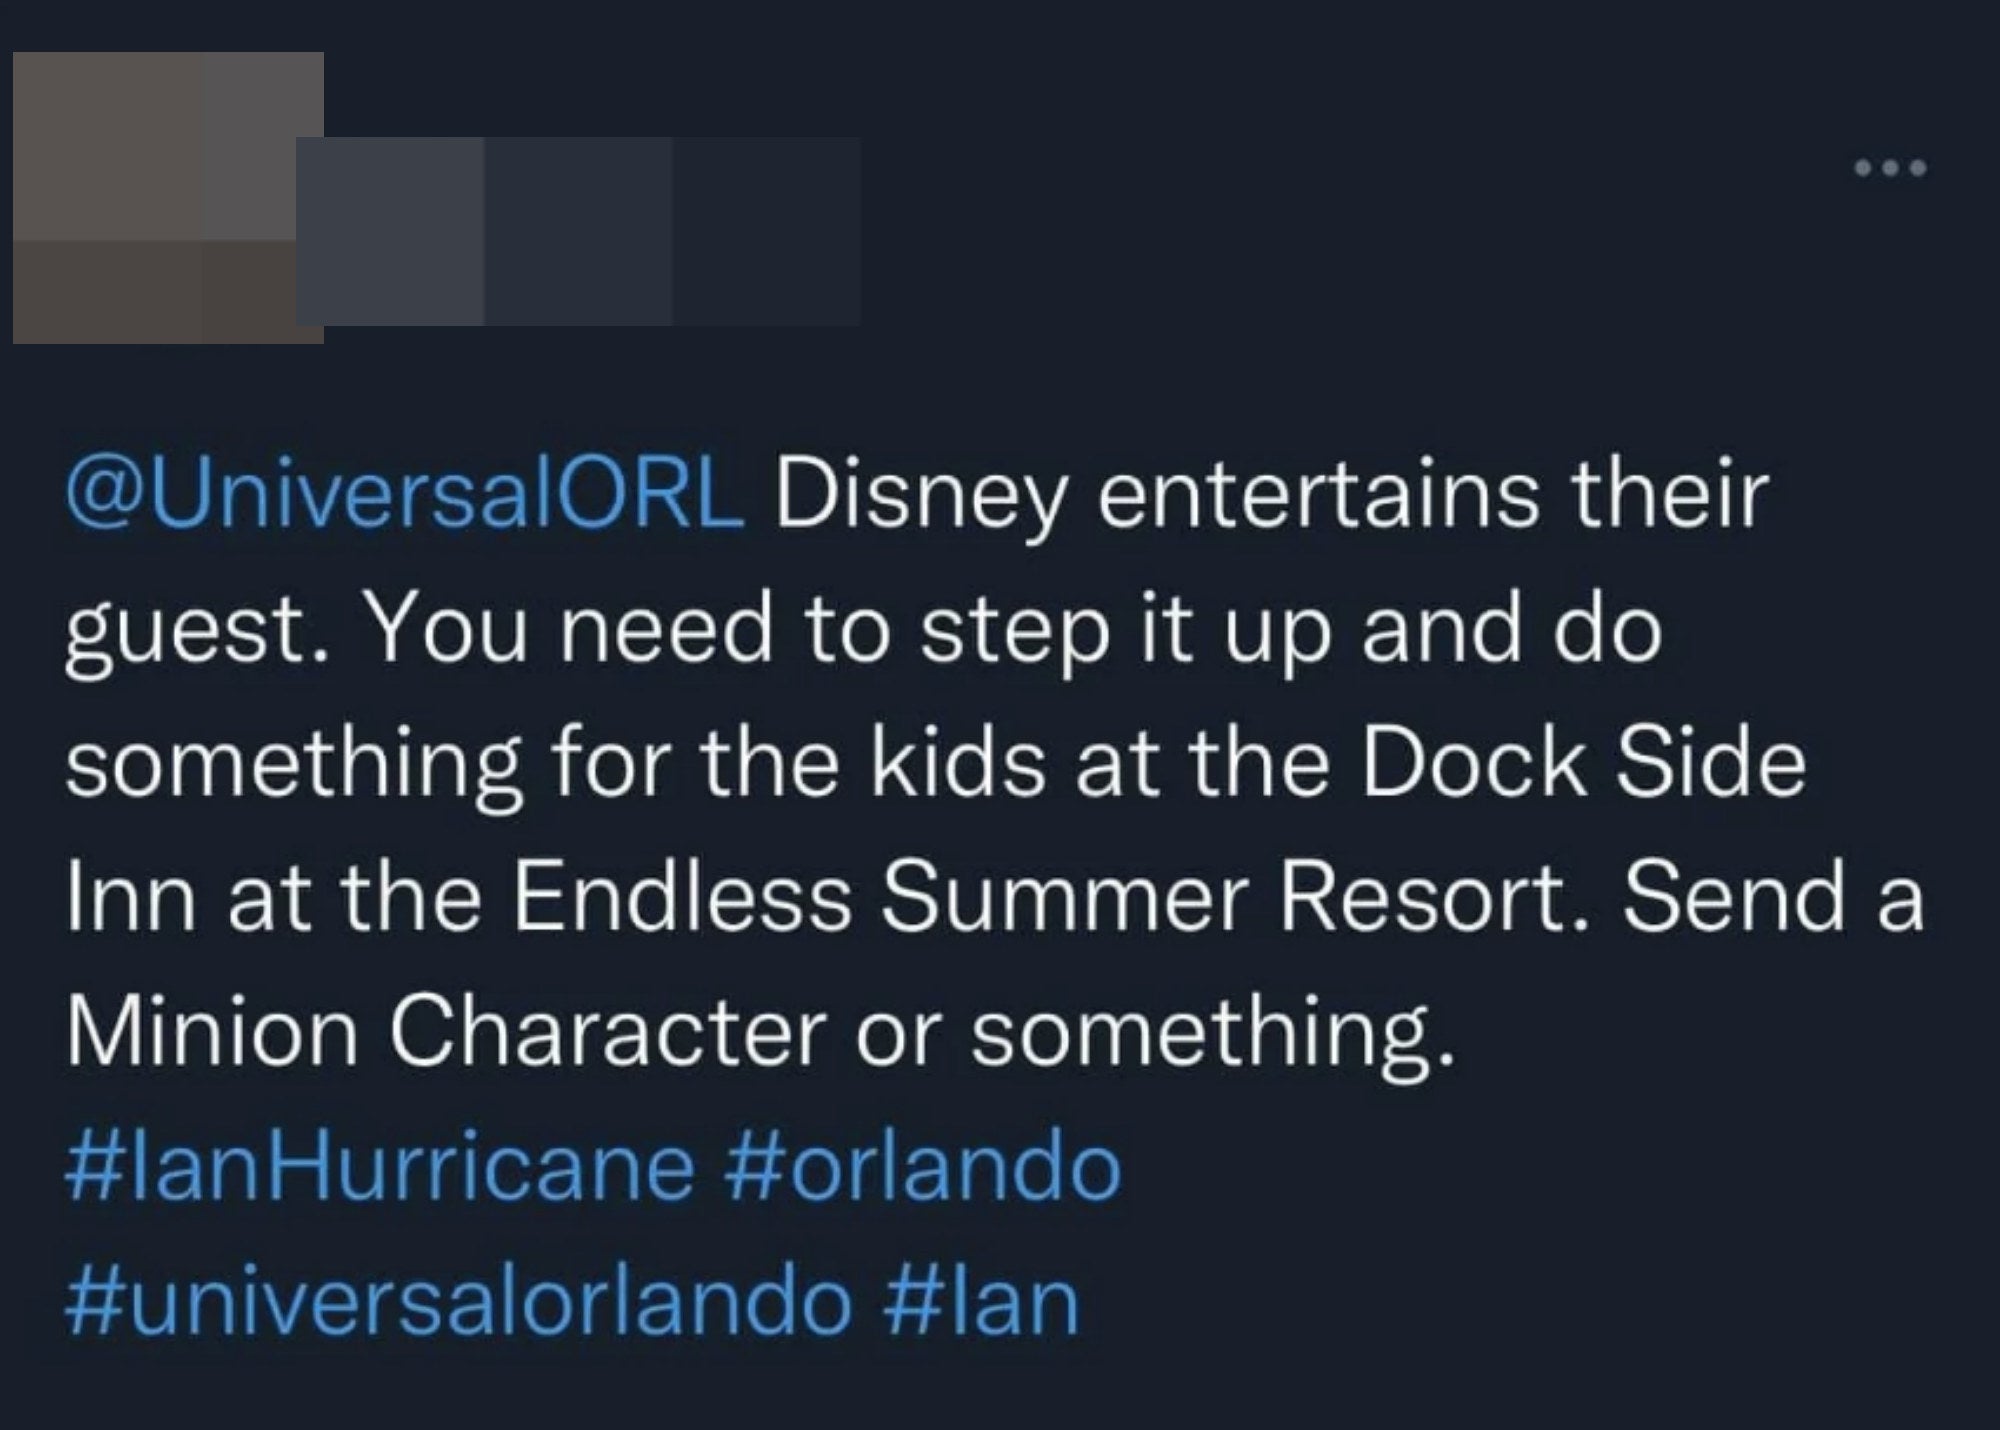 A person says Universal needs to step up their entertainment and send Minion characters to a specific hotel